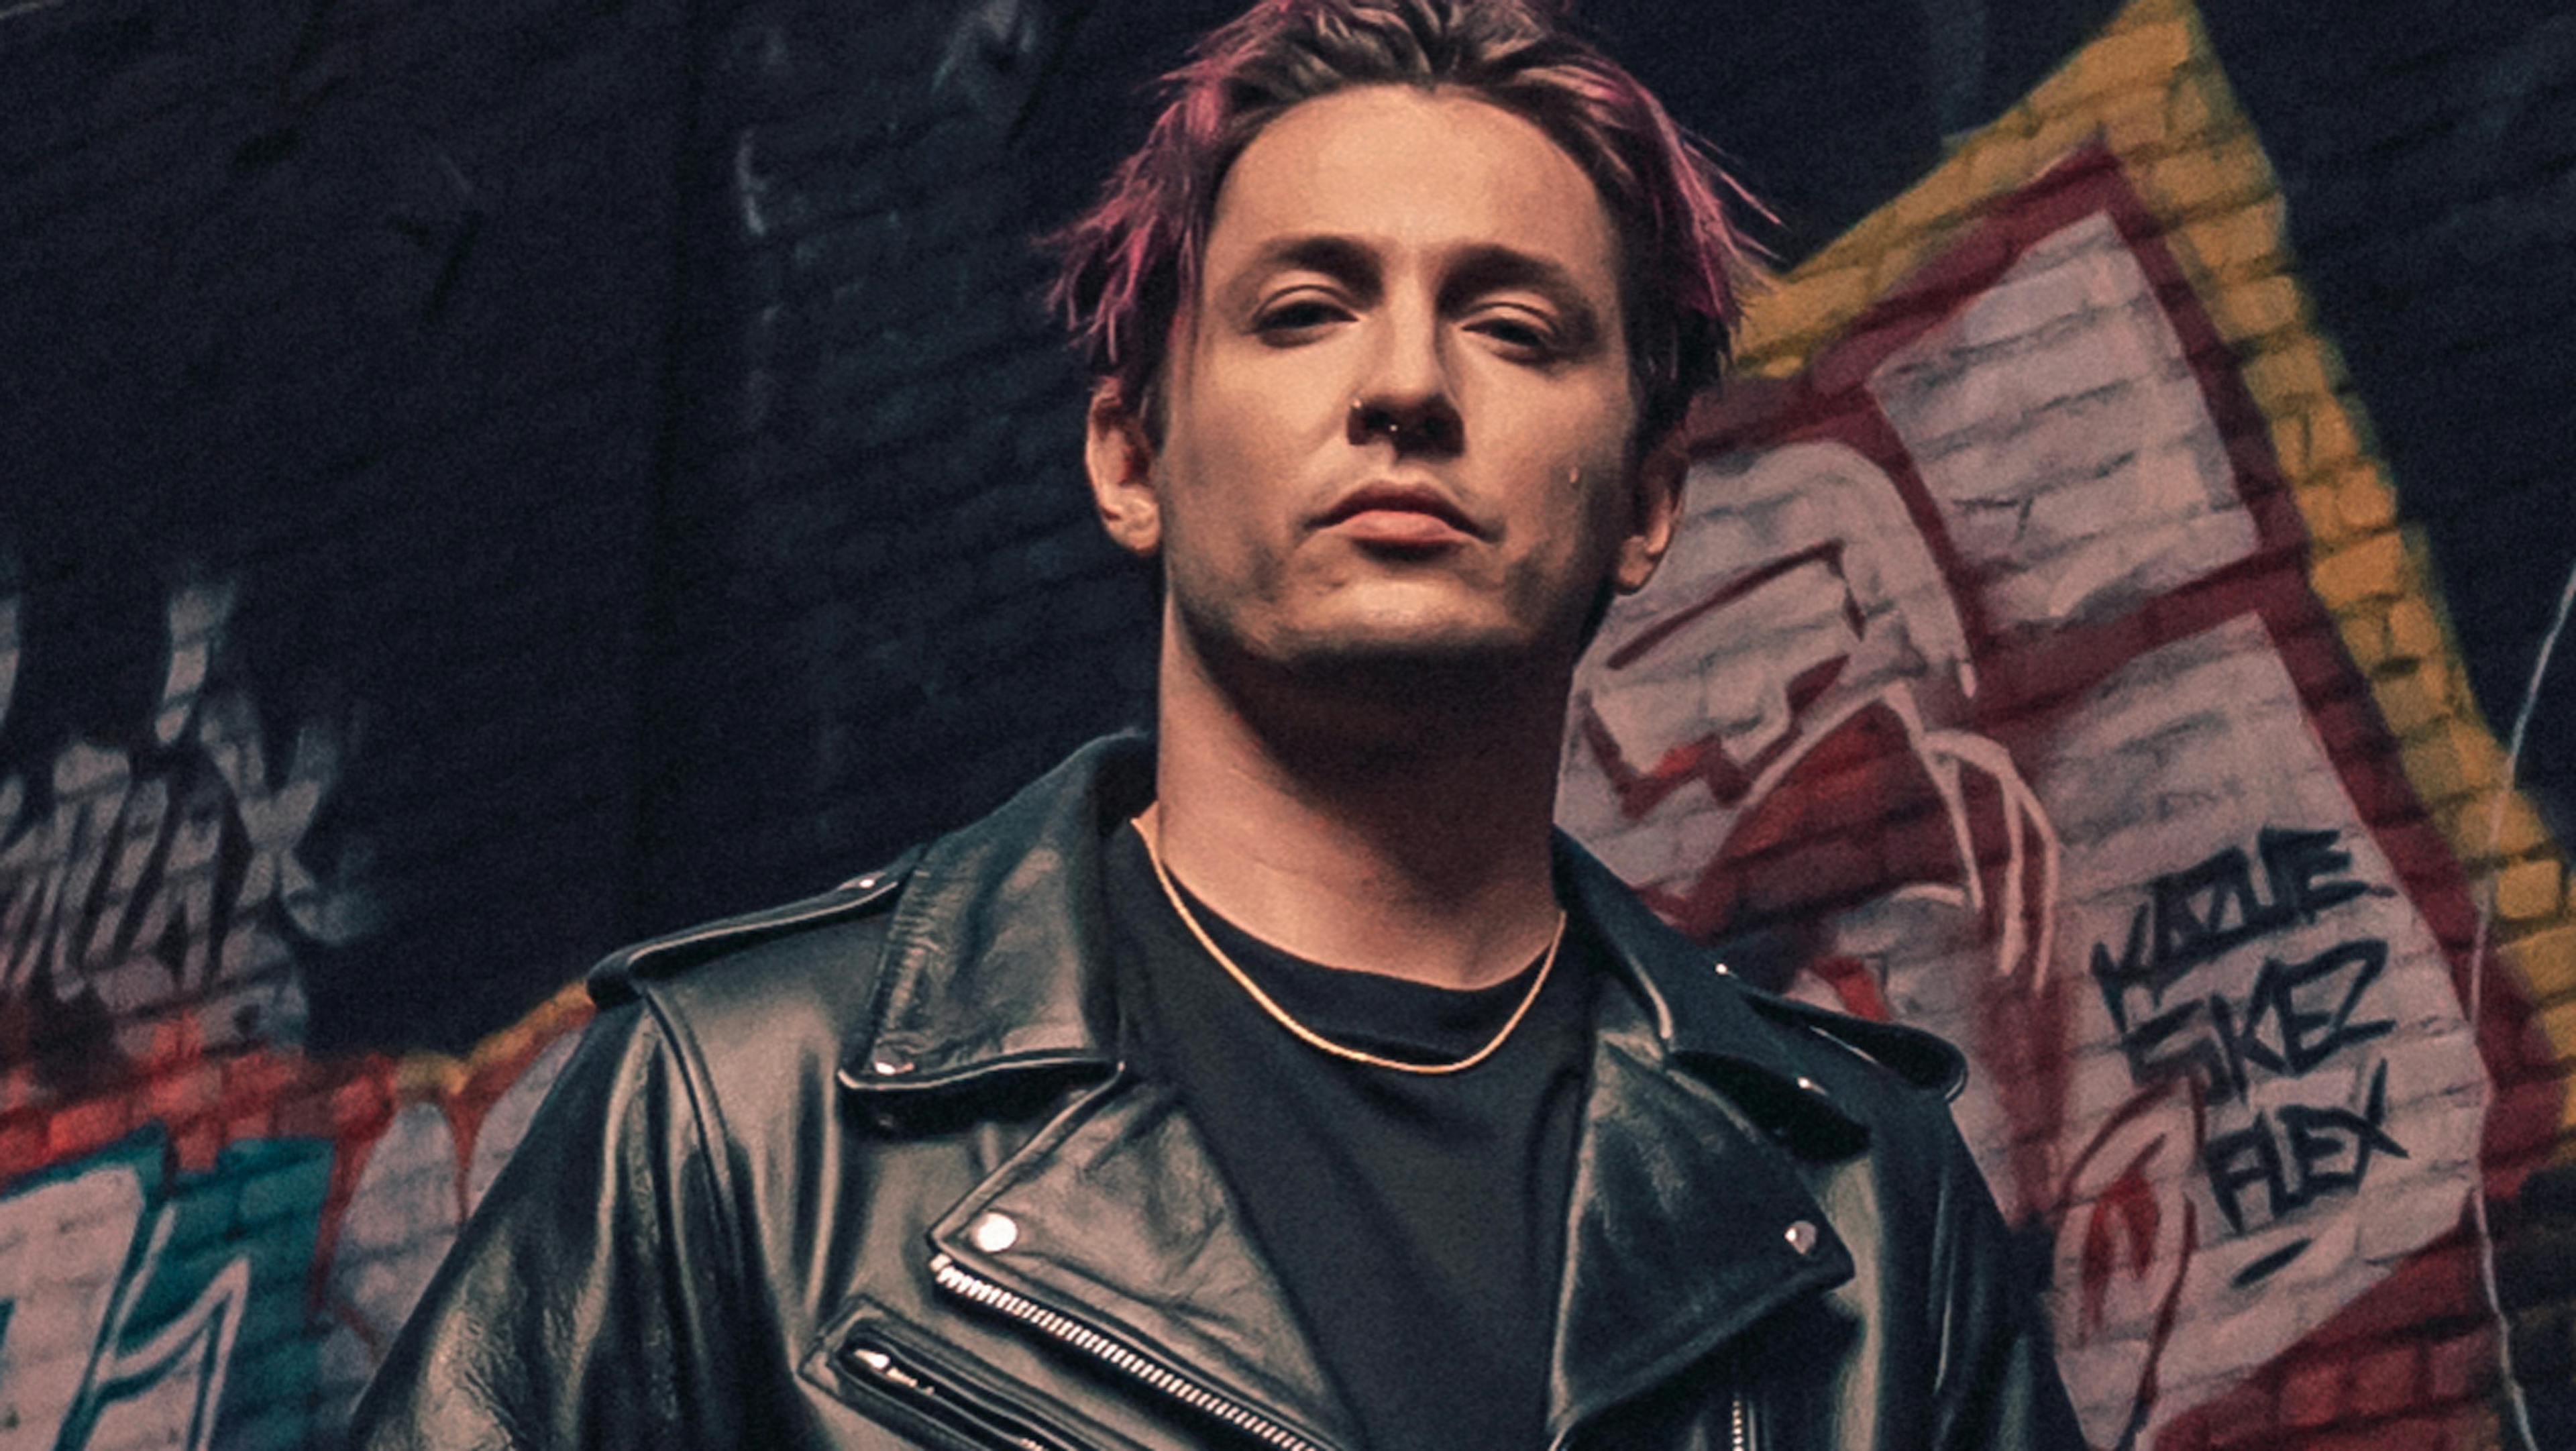 The Word Alive's Telle Smith: The 10 Songs That Changed My Life